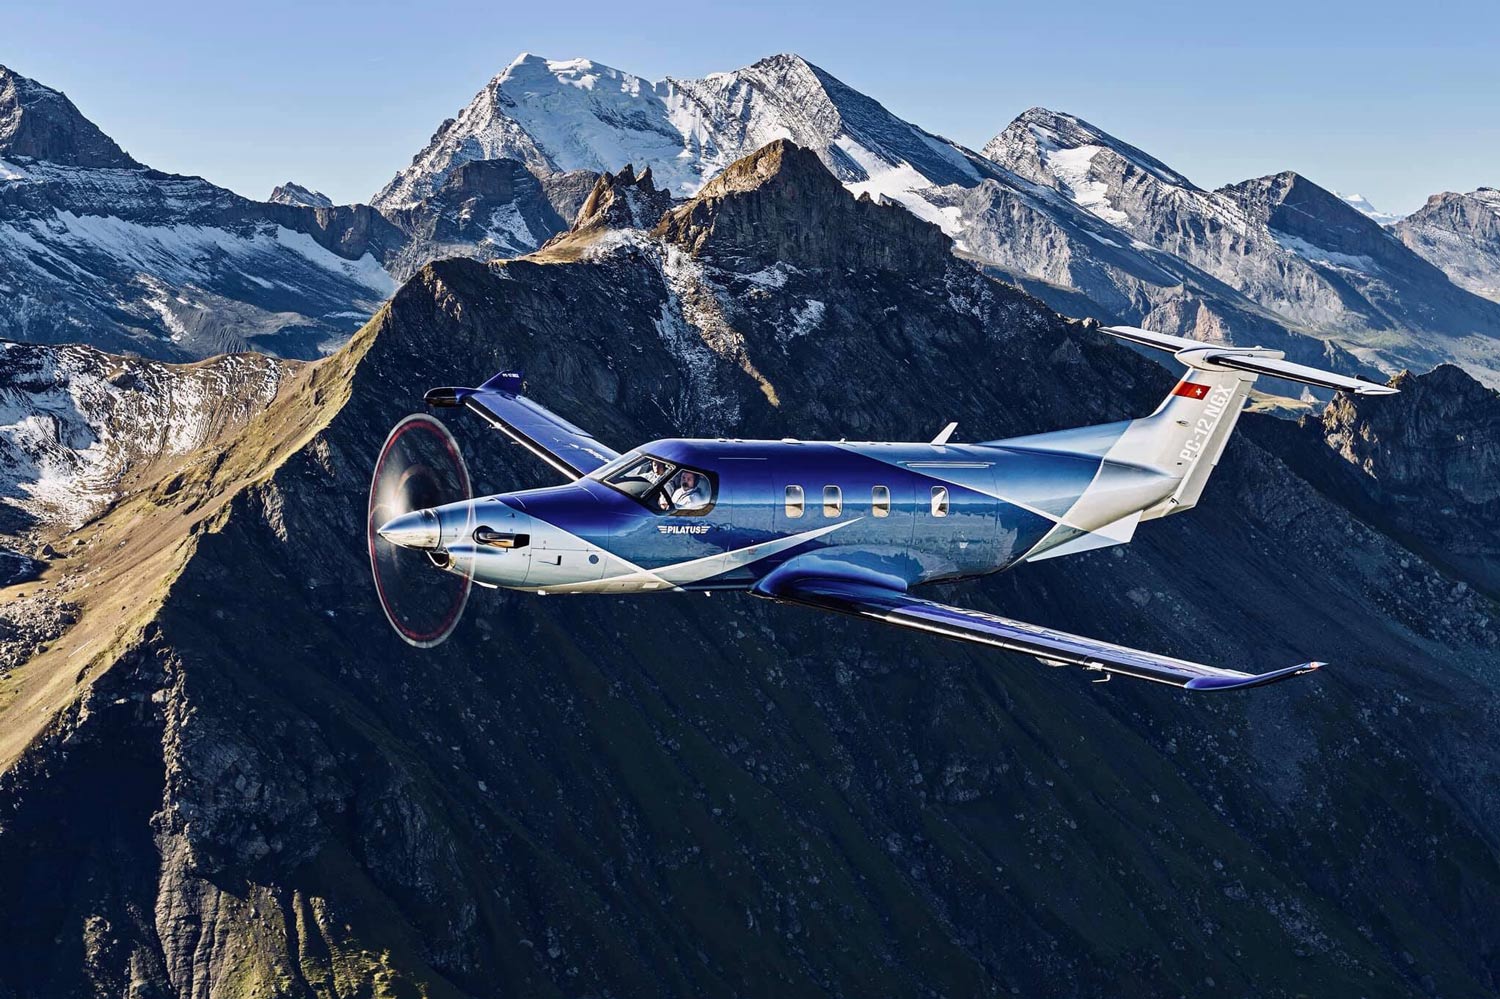 Pilatus Shows Off the New PC-12 NGX